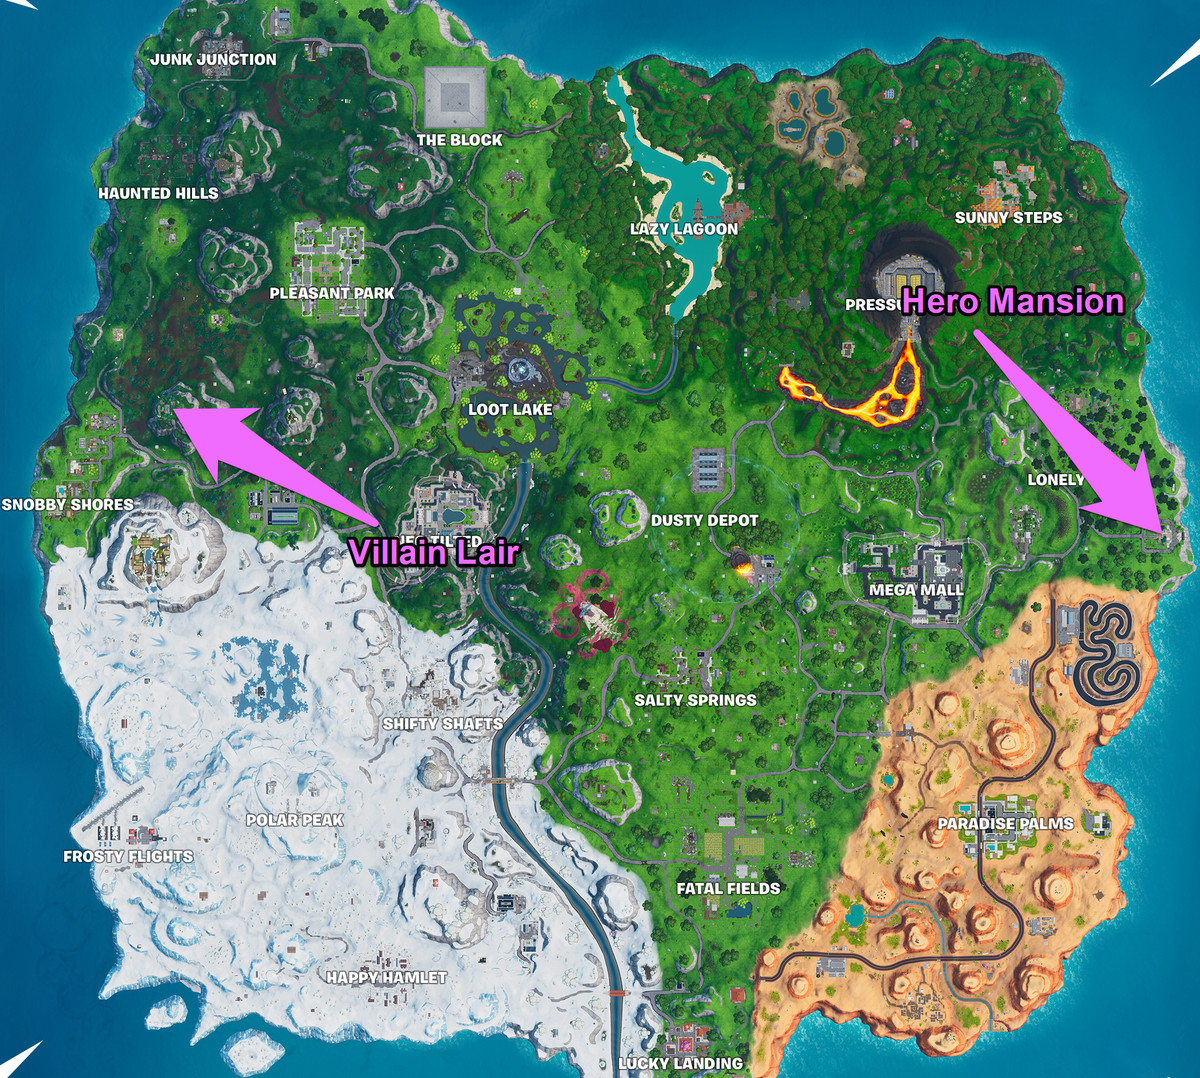 A Fortnite map with the Hero Mansion and Villain Lair locations marked